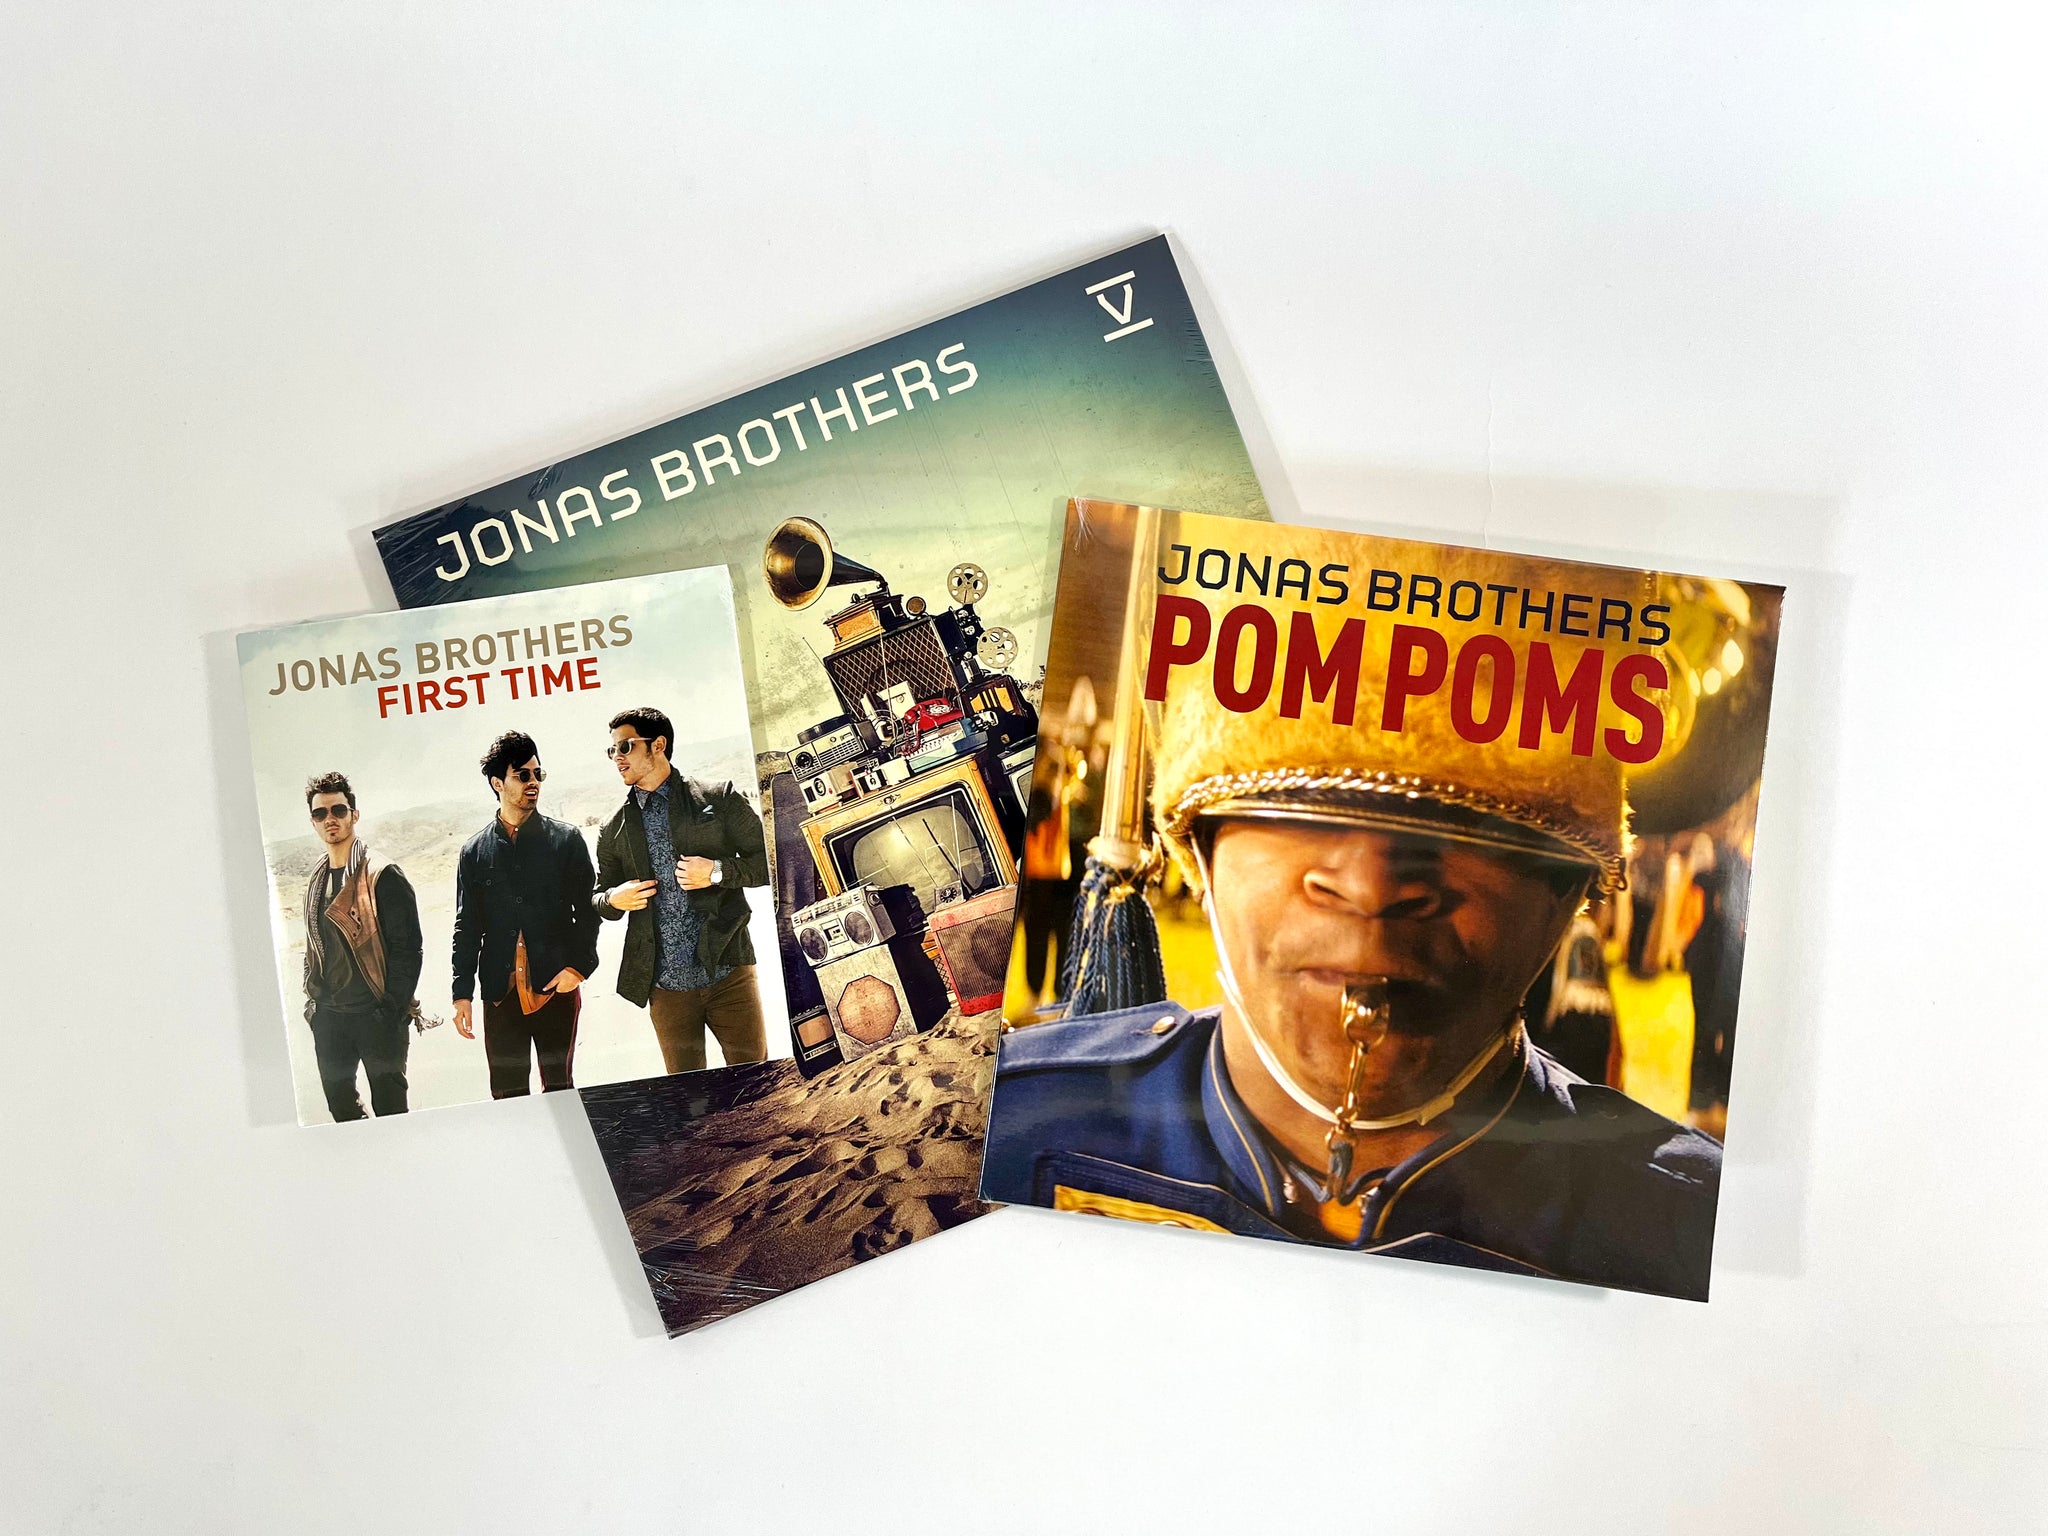 EXCLUSIVE "V" BUNDLE: Jonas Brothers "V" LP (clear vinyl) + Pom Poms (yellow & red splatter vinyl) 10 inch single! + First Time 7 inch single!